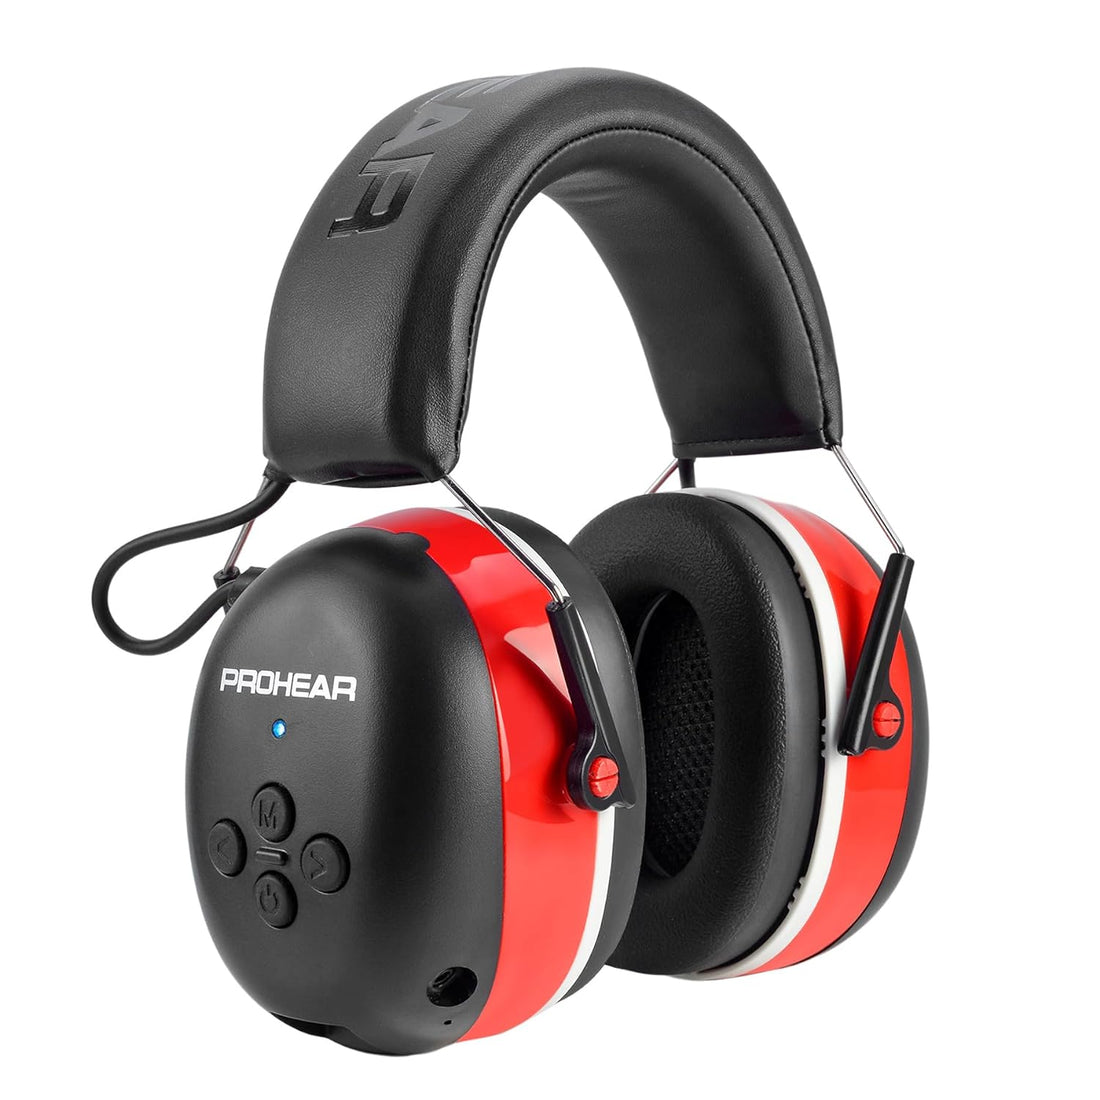 PROHEAR 037 Bluetooth 5.0 Hearing Protection Headphones with Rechargeable 1100mAh Battery, 25dB NRR Safety Noise Reduction Ear Muffs with 40H Playtime for Mowing - Red